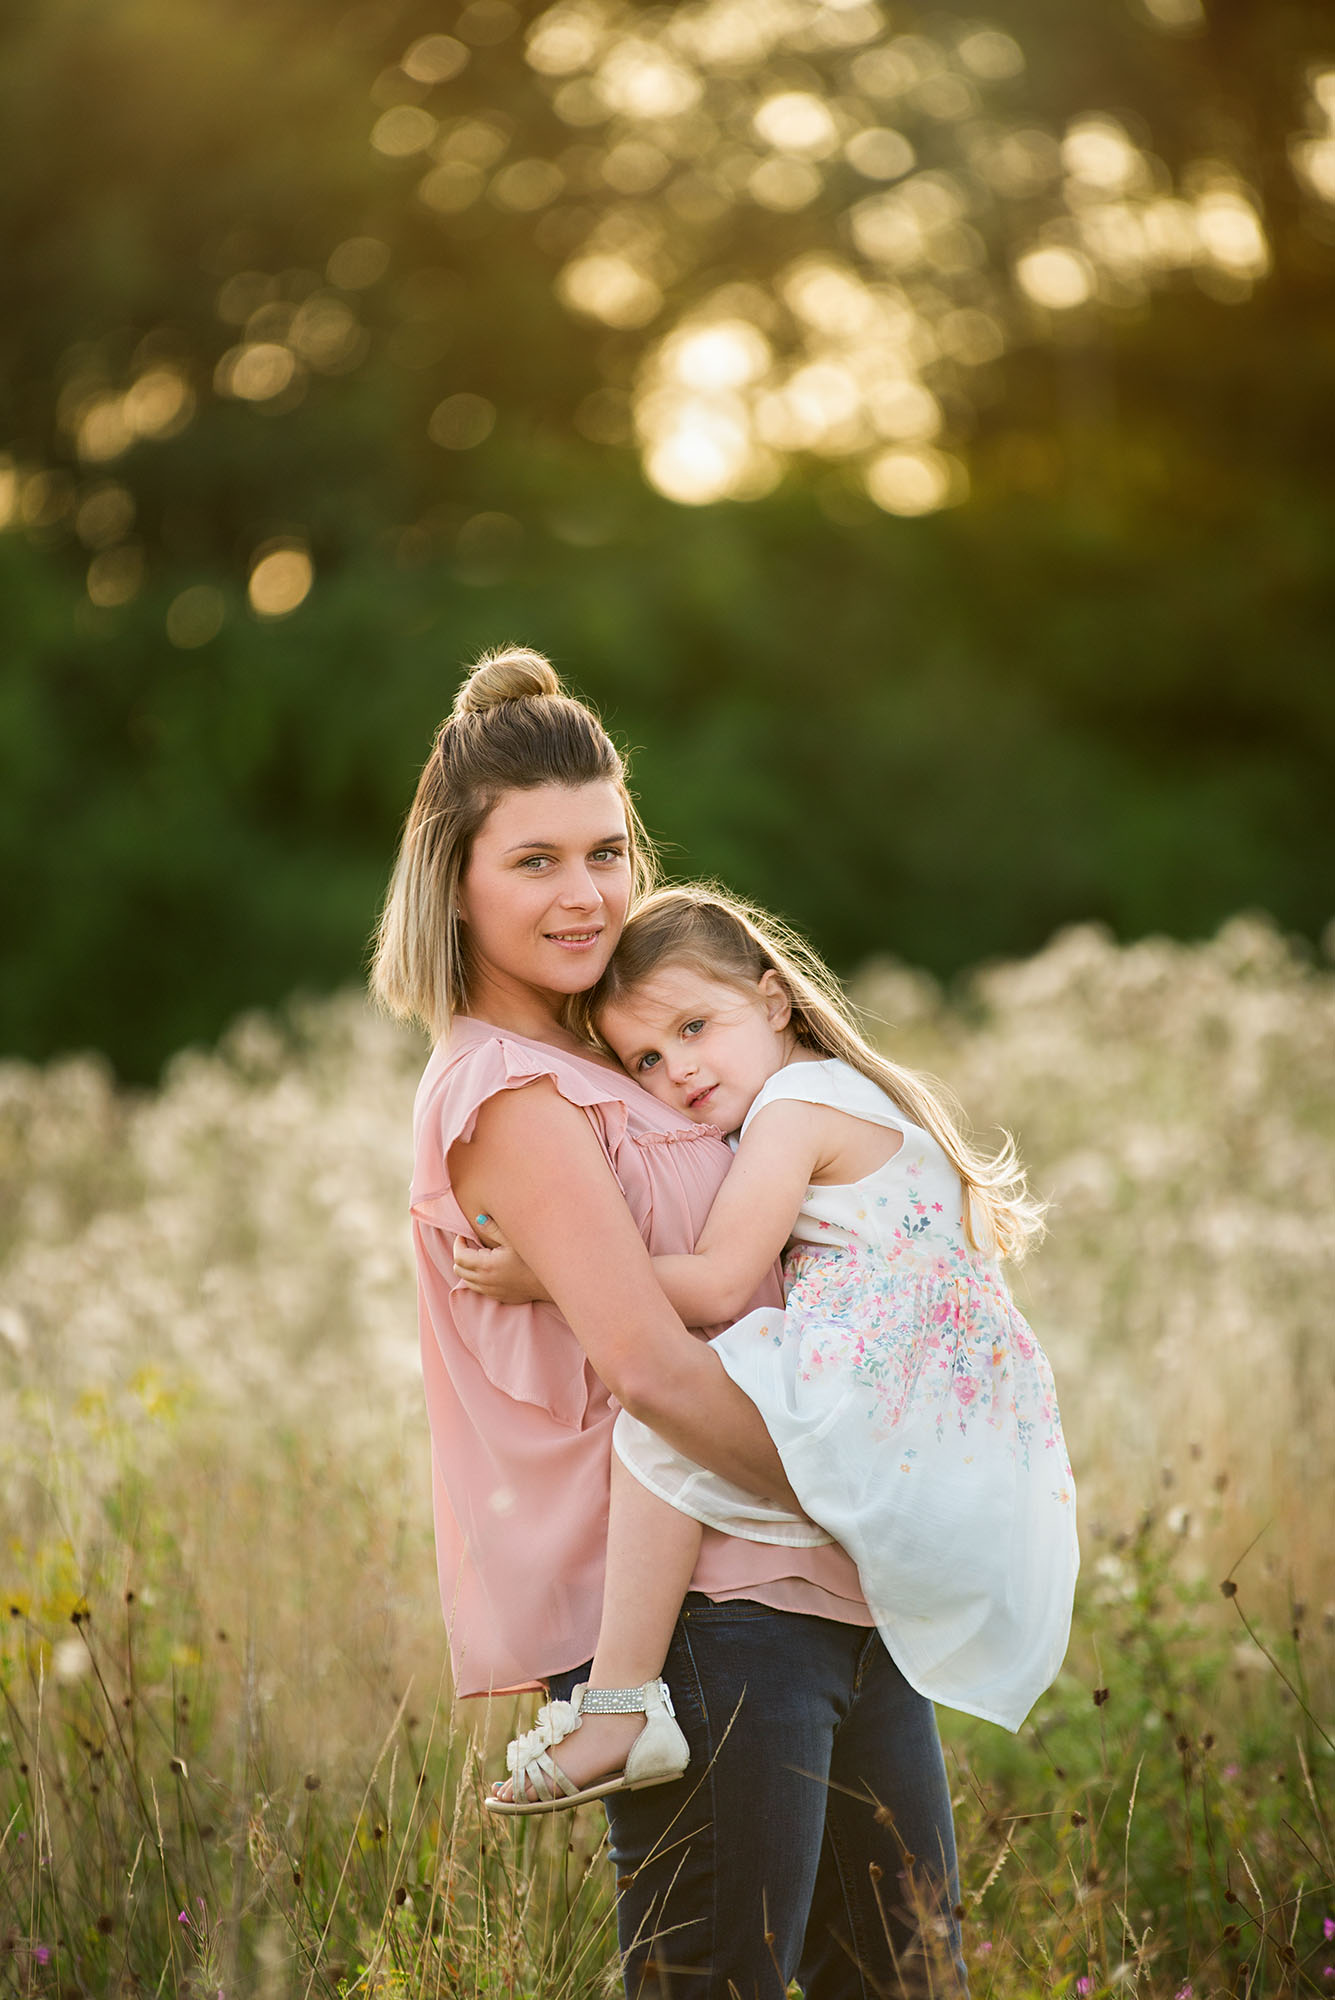 My Top Mothers Day Gifts - Barnsley family photographer